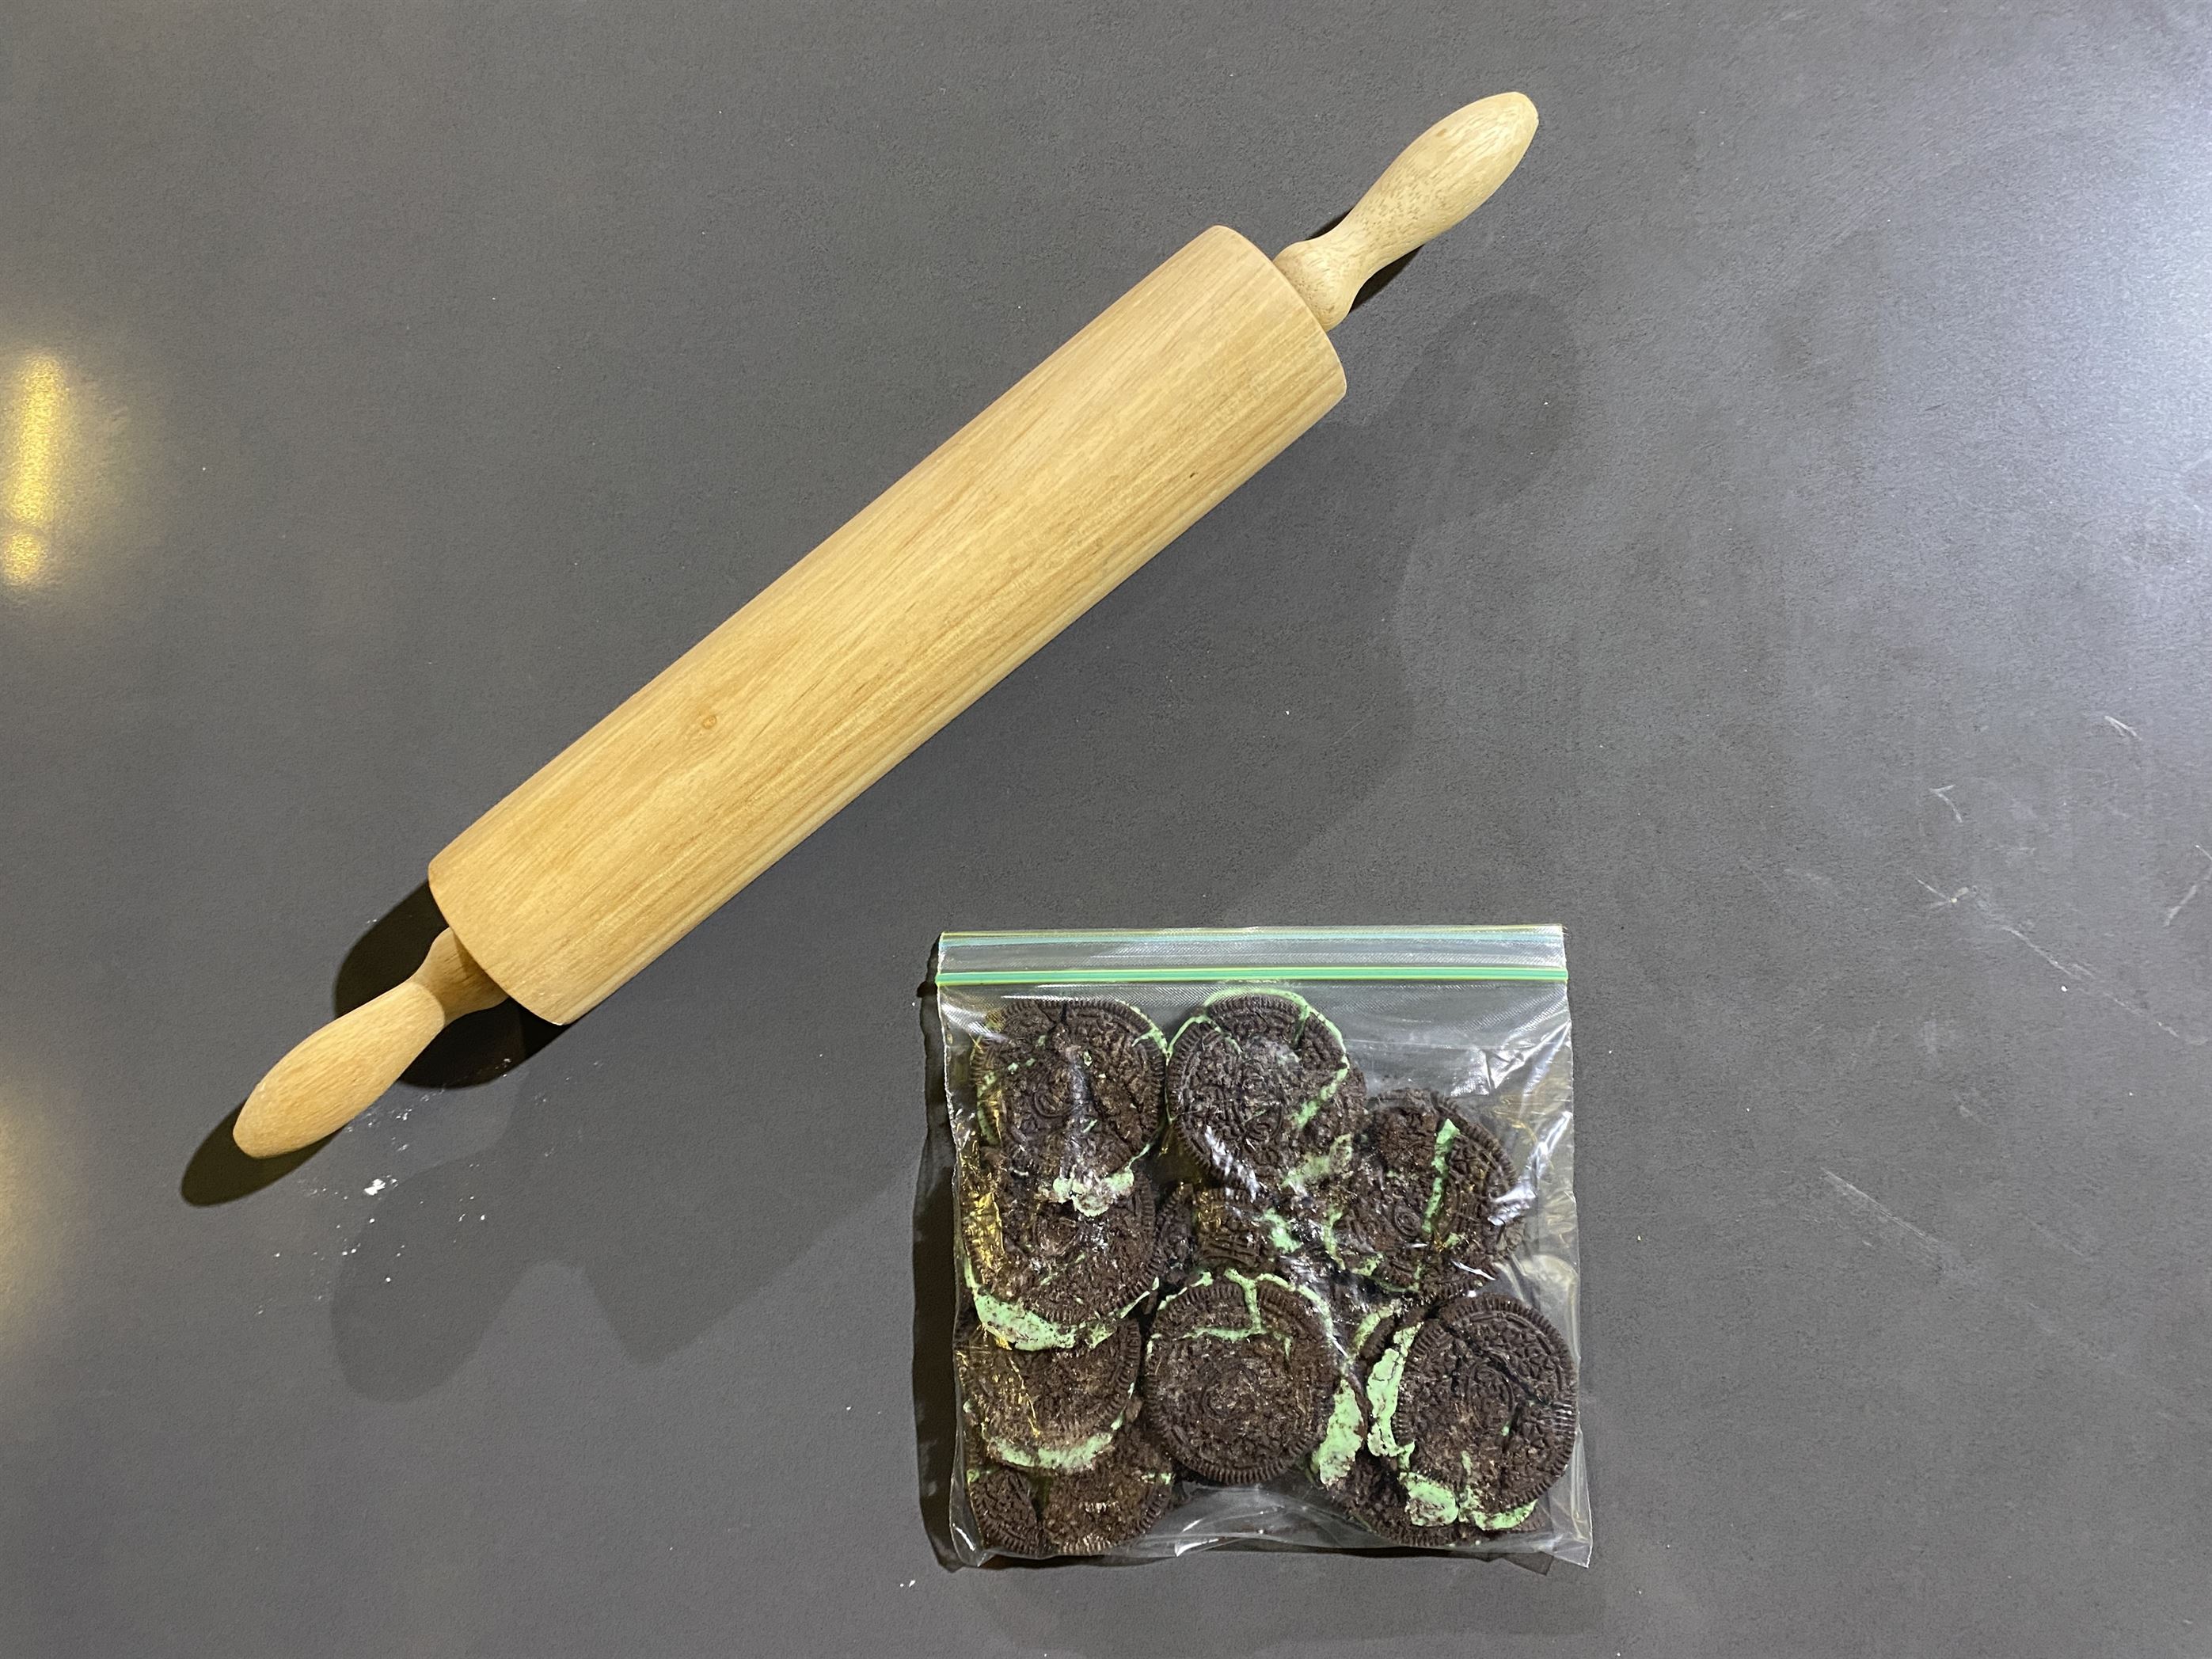 Break up your mint Oreos in a Ziploc bag with a rolling pin.
Sal DiMaggio | The Montclarion